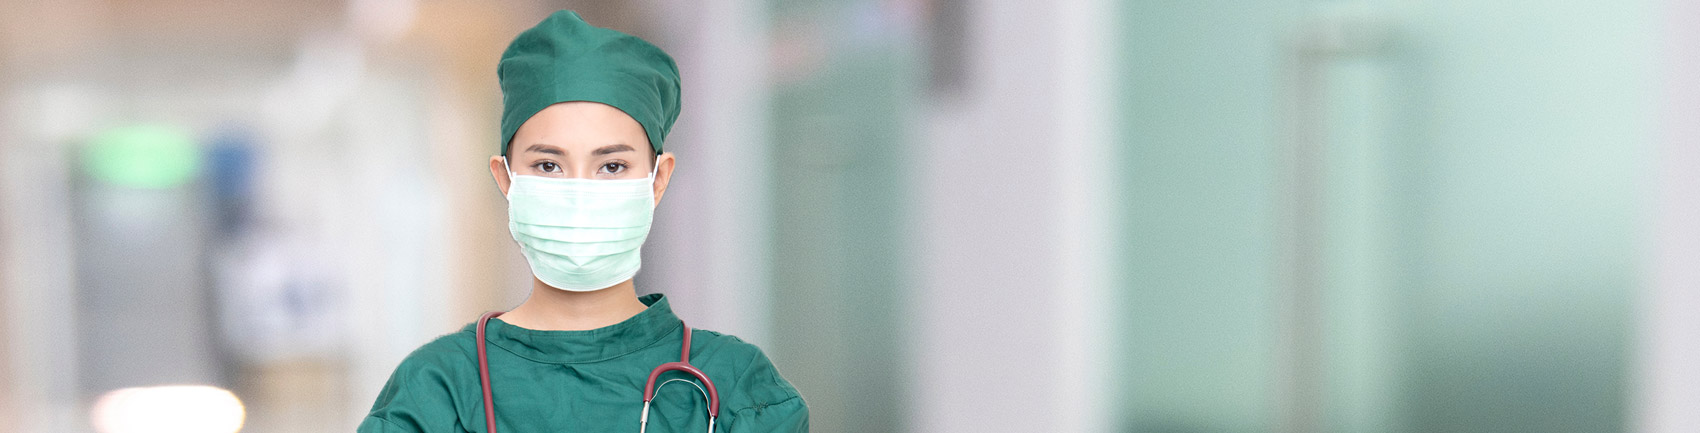 Medical worker wearing green scrubs and cap also wearing a face mask.